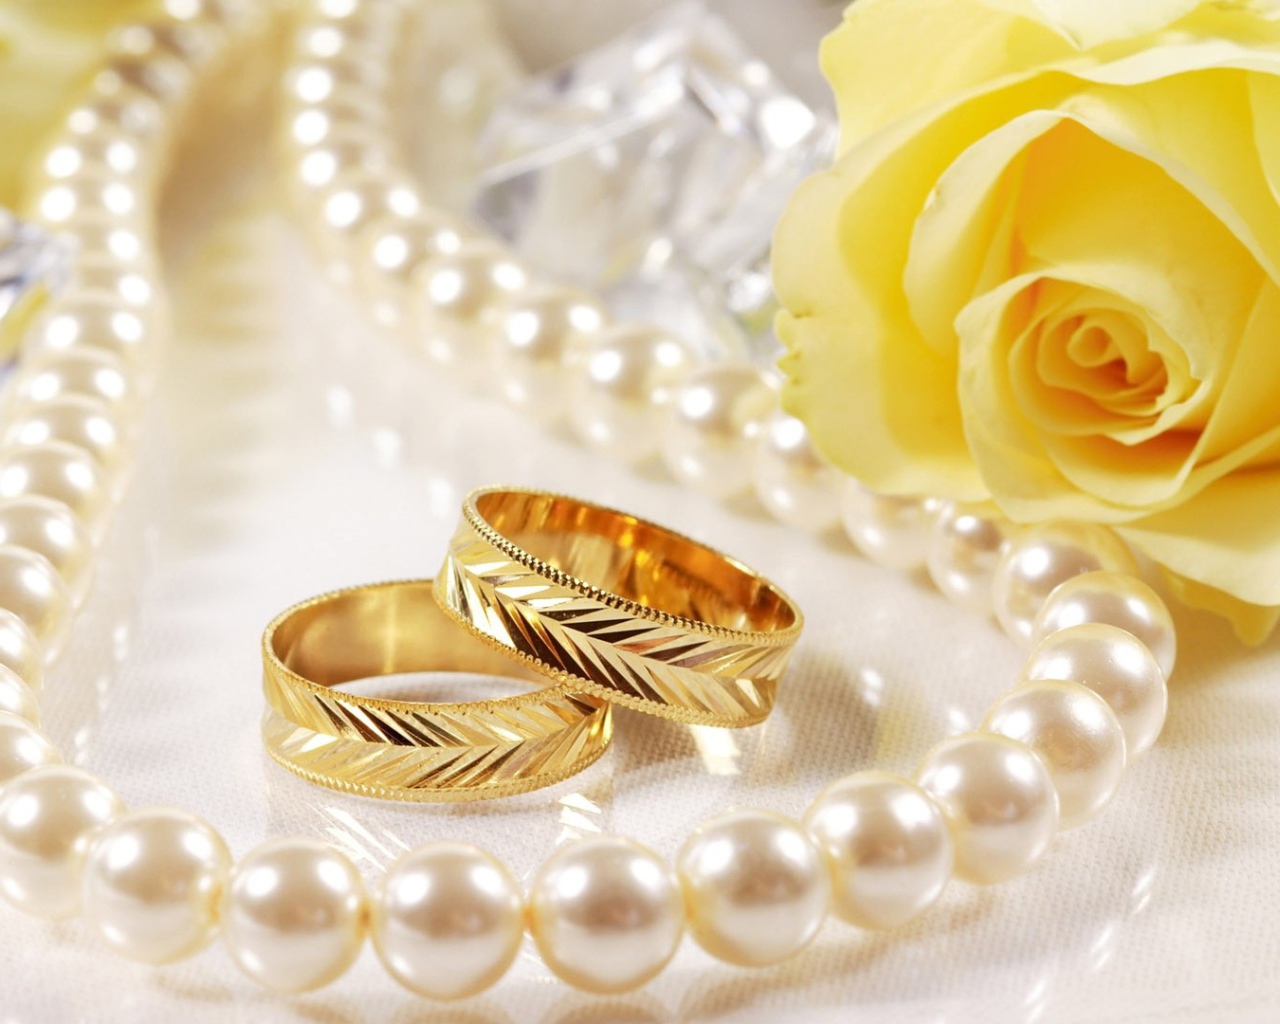 Wedding rings and yellow rose